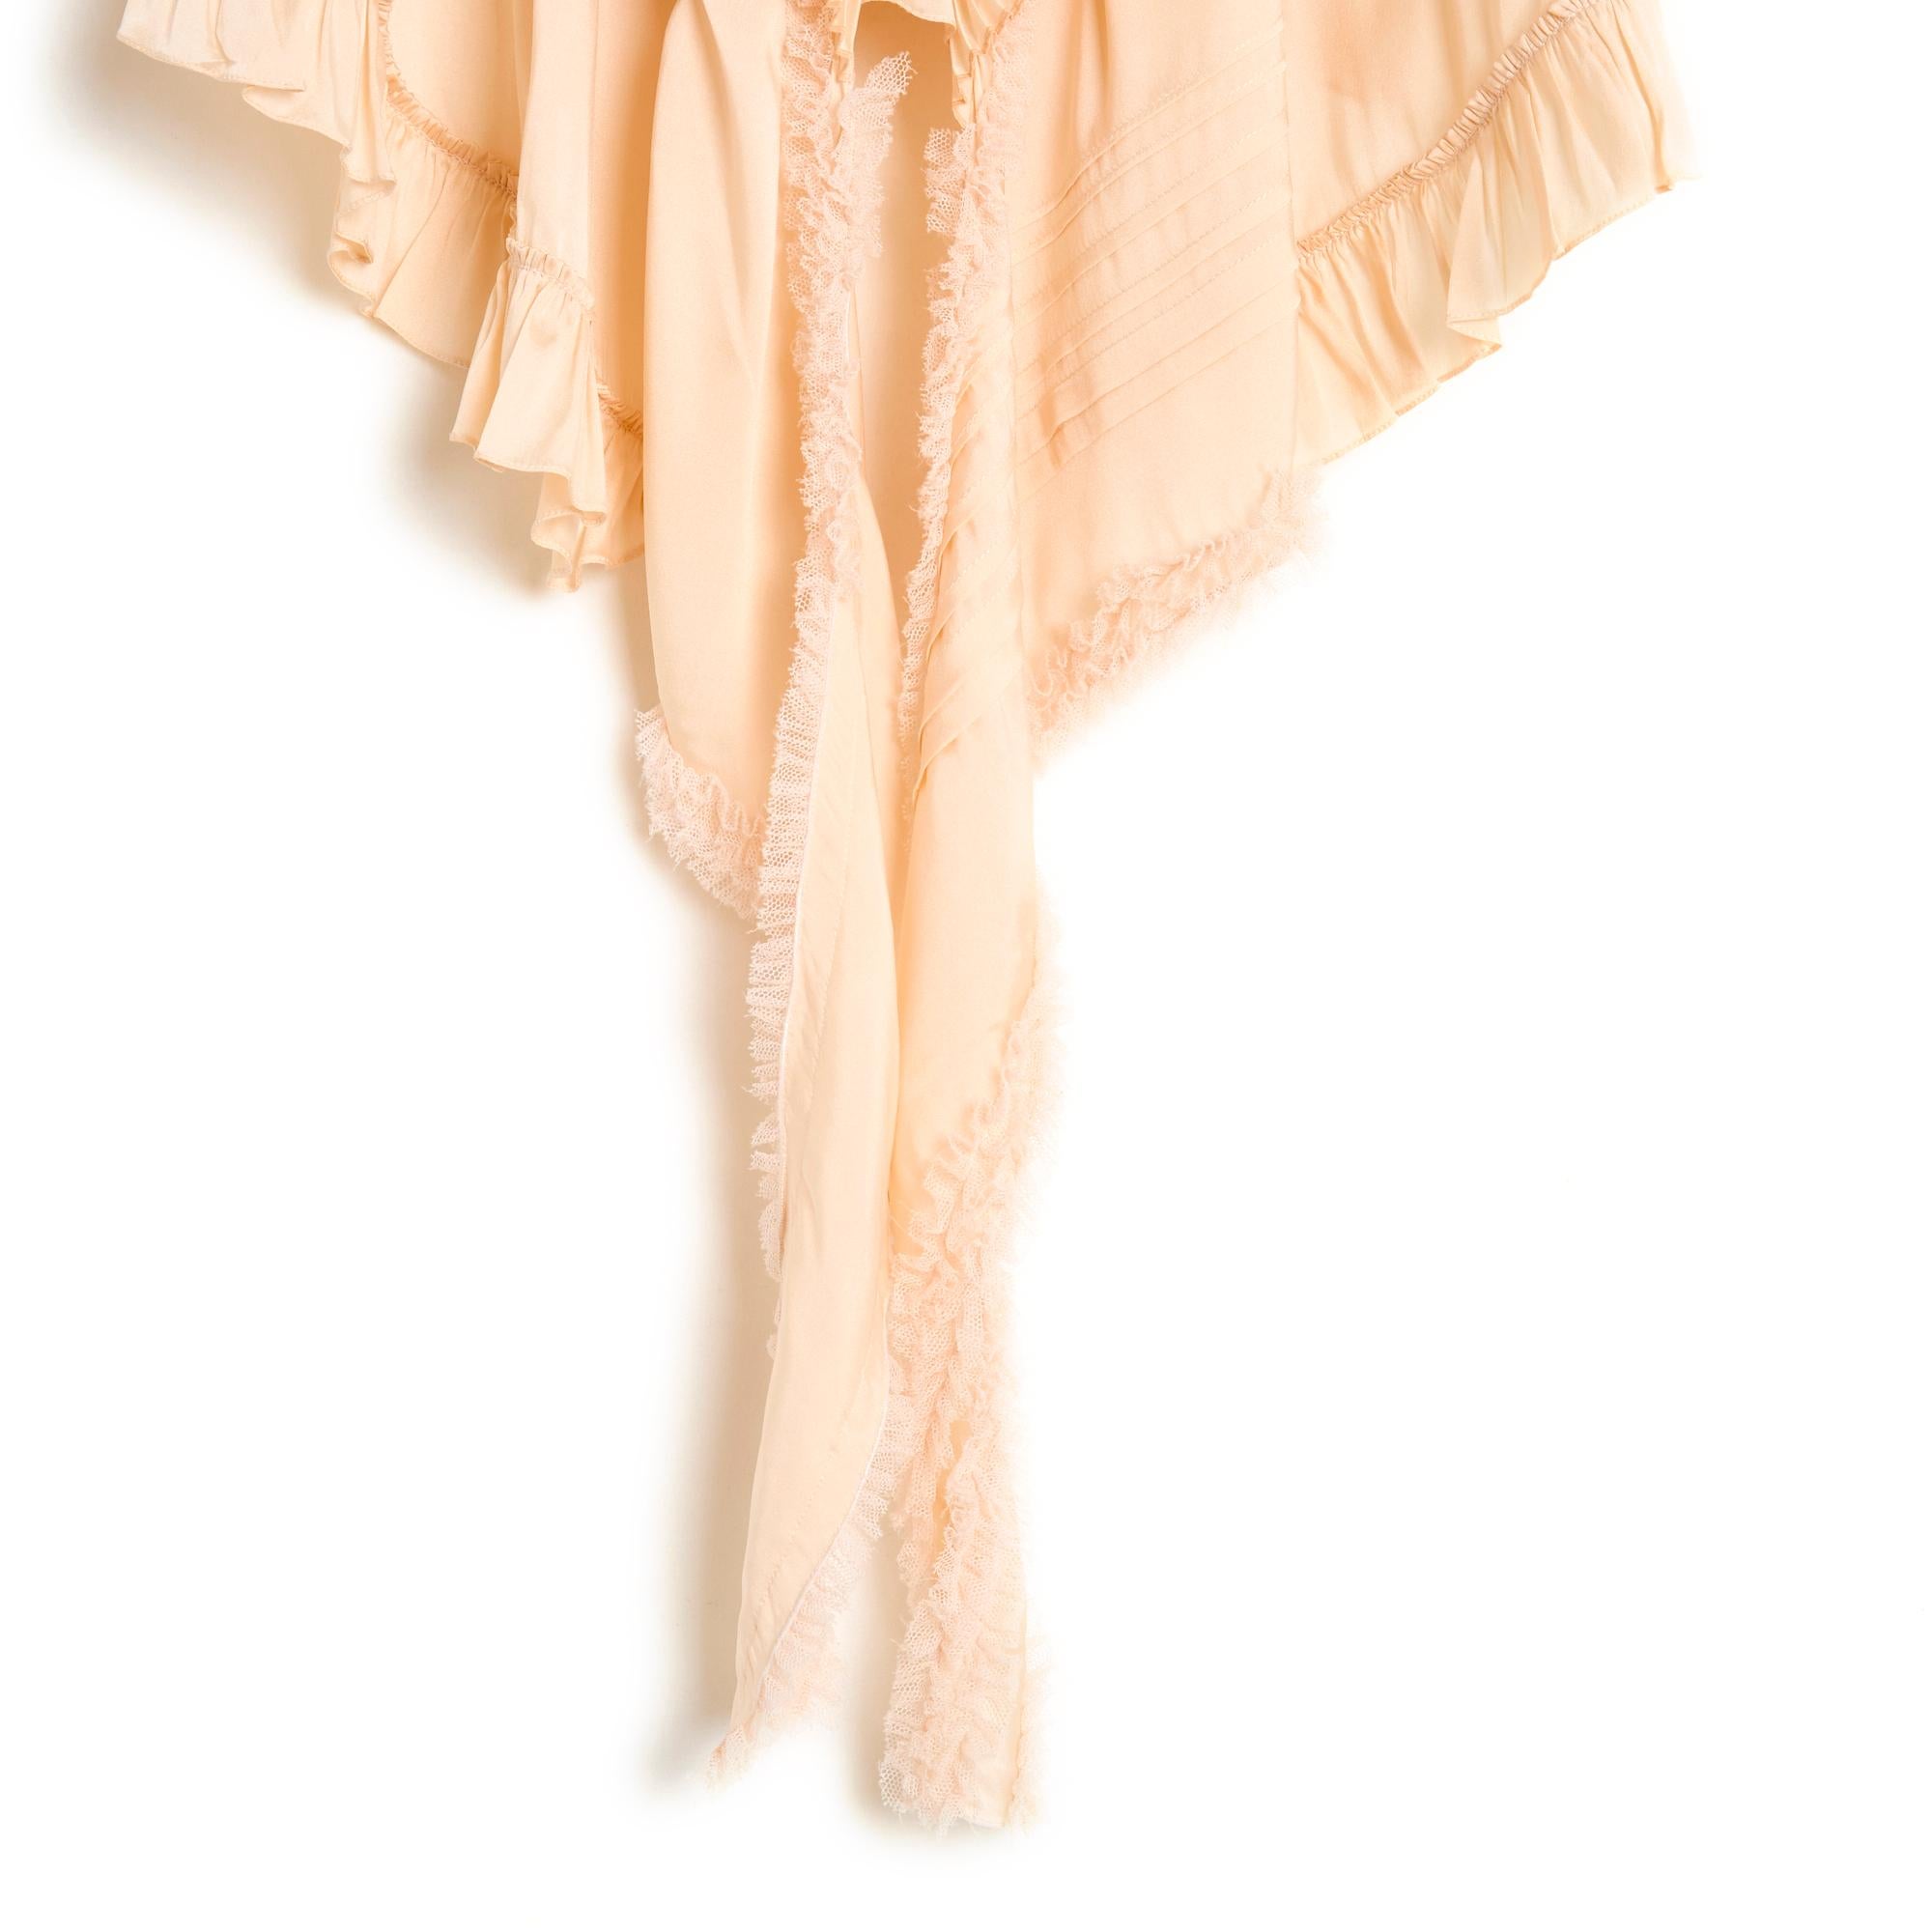 Top Chloé Spring Summer 2018 collection (by Natacha Ramsay-Levy) in apricot-colored silk twill, flared shape, deep V-neckline at front edged with a micro tulle ruffle and a long pleated ruffle, pleated and pique bib, highlighted shoulders with